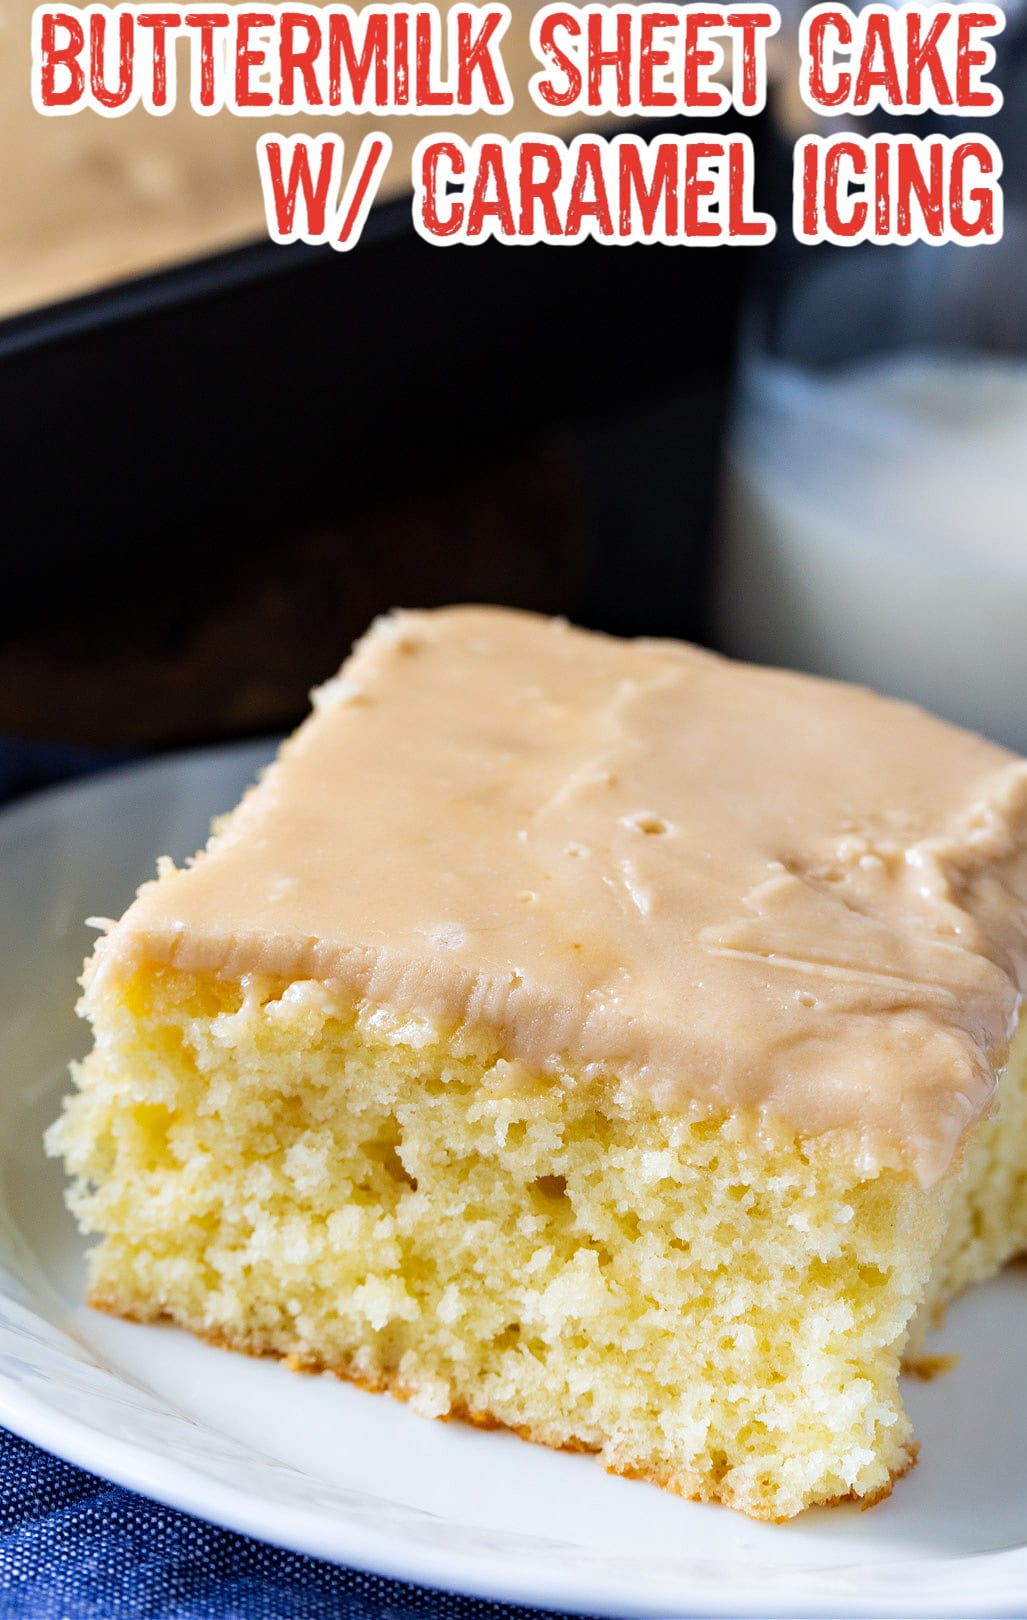 Slice of Buttermilk Sheet Cake with Caramel Icing.